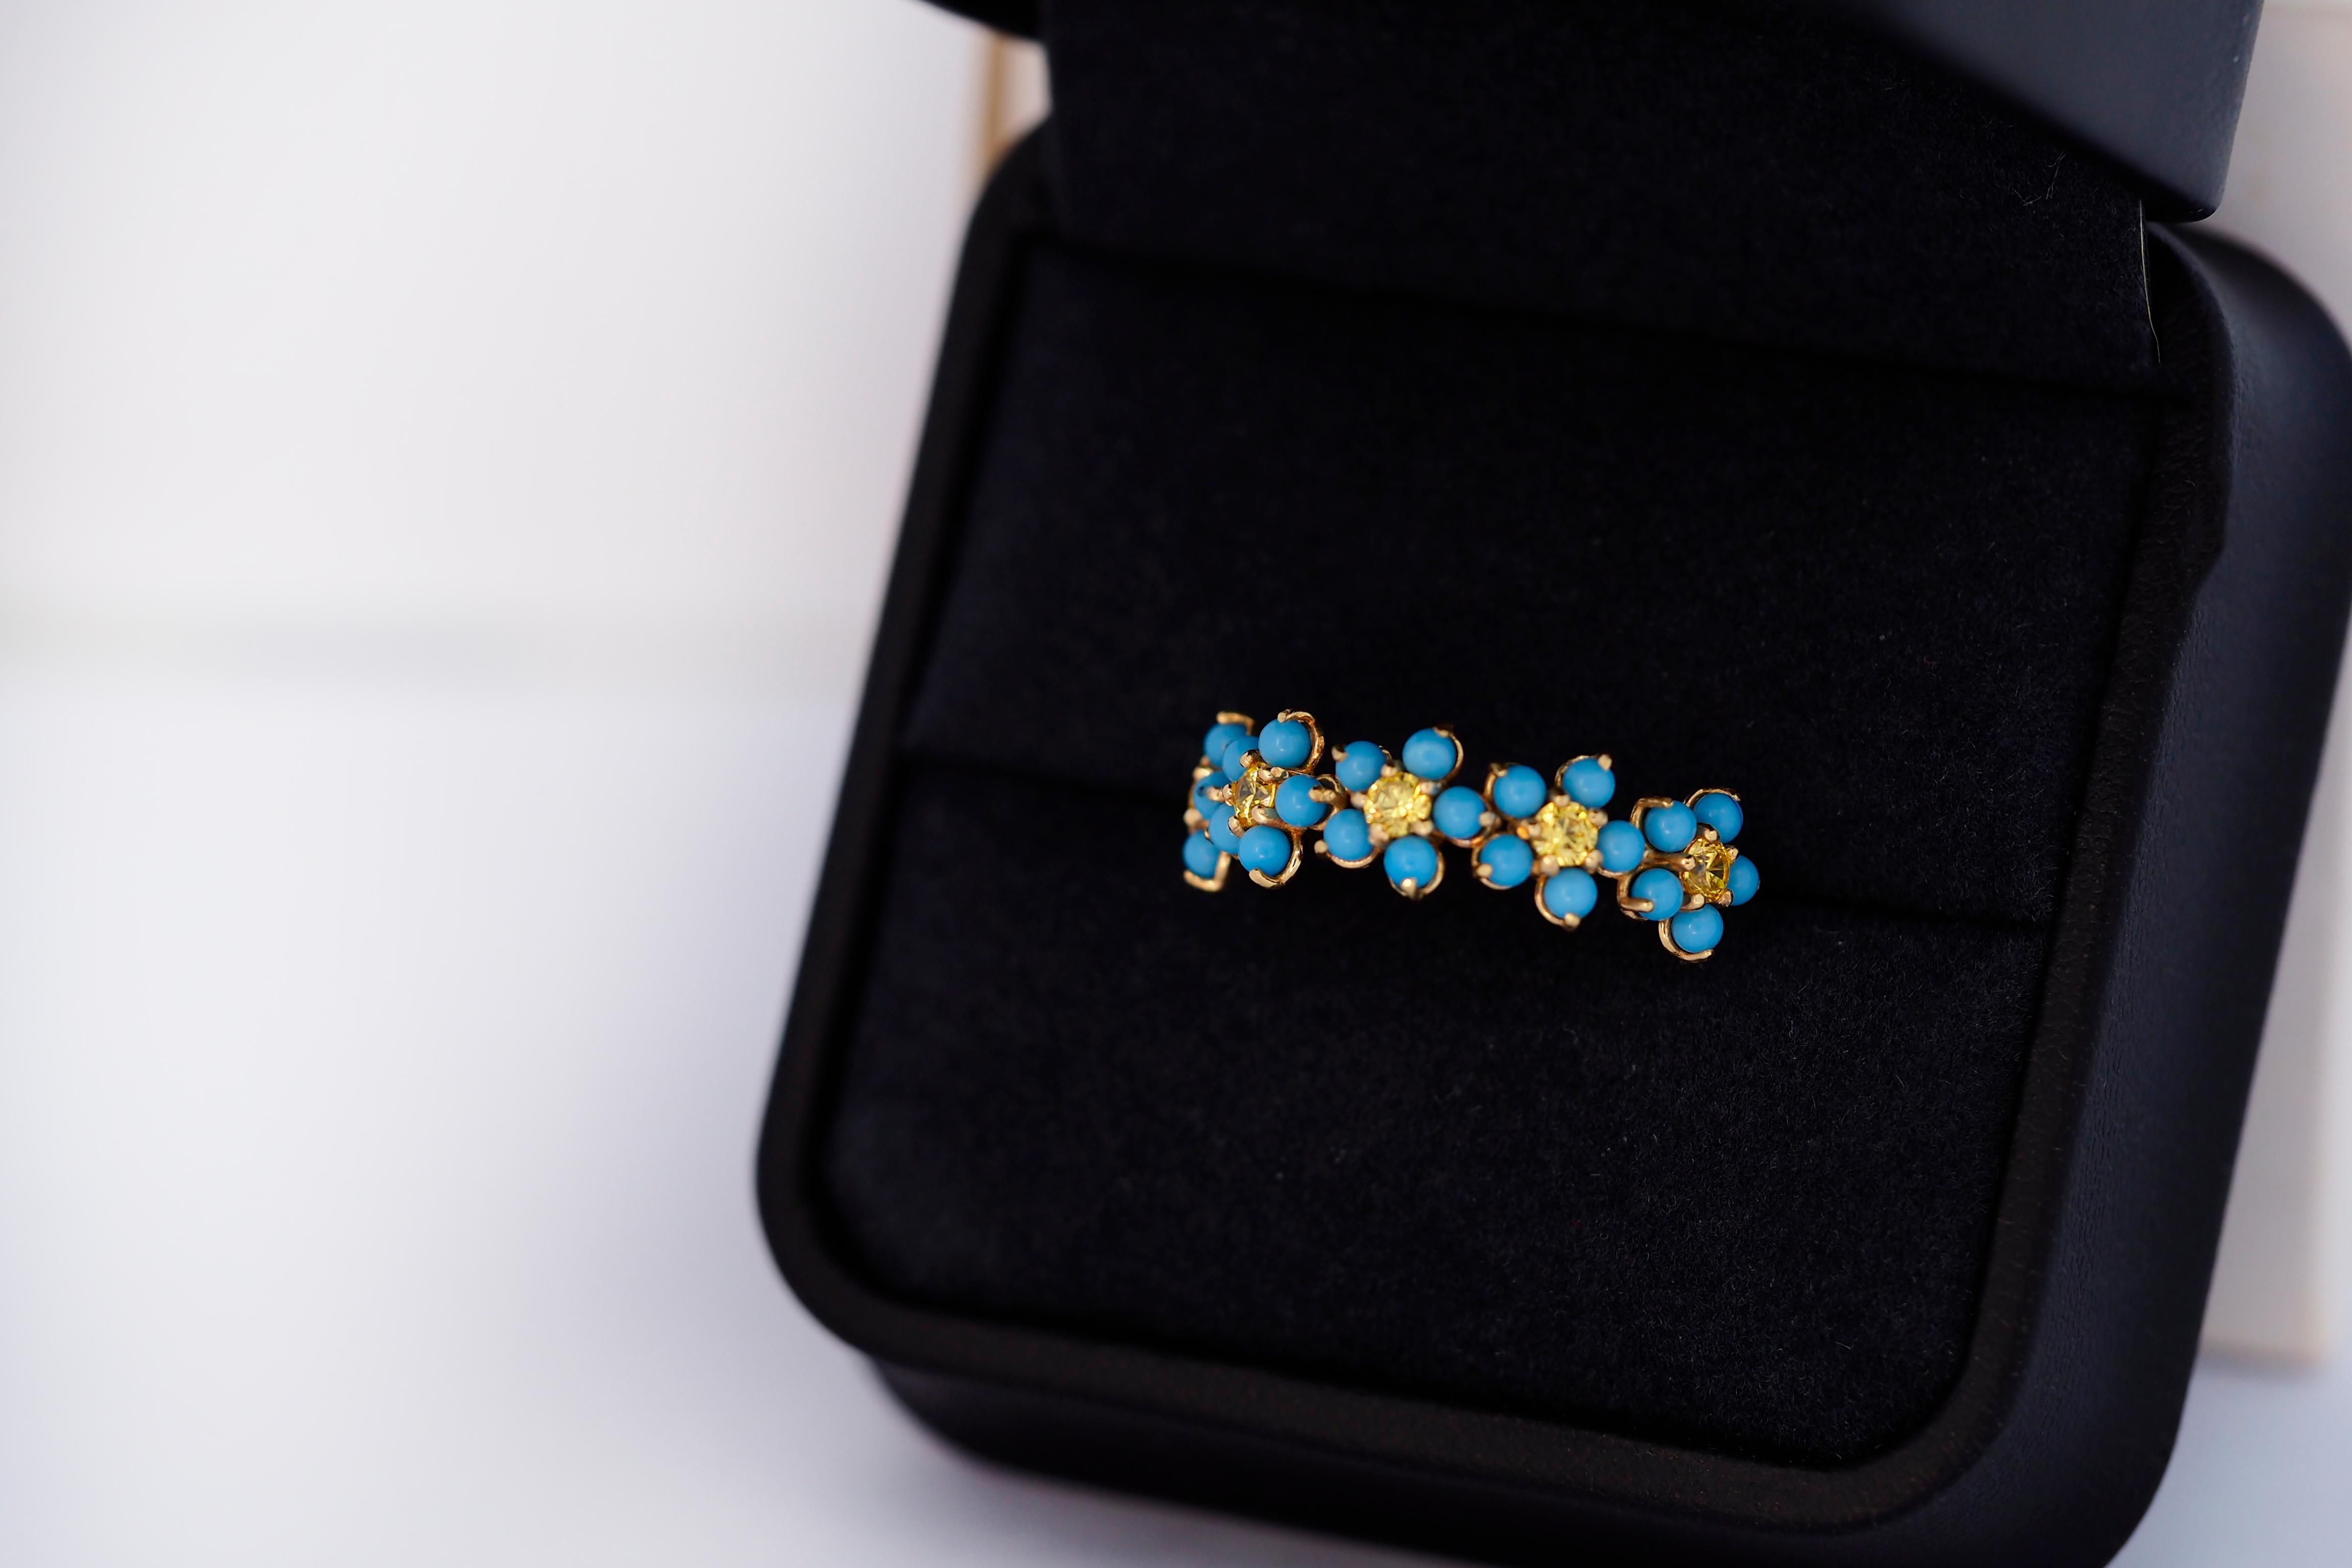 For Sale:  Forget me knot flower 14k gold ring.  4